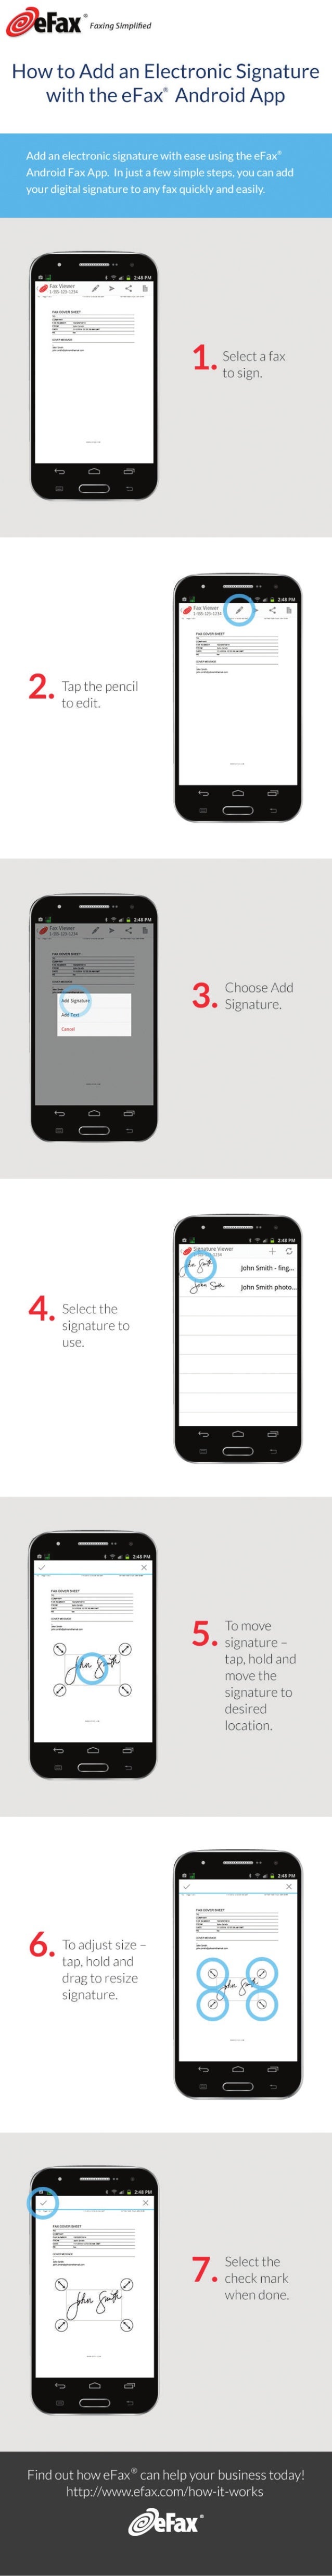 How to Add an Electronic Signature with the eFax Android App